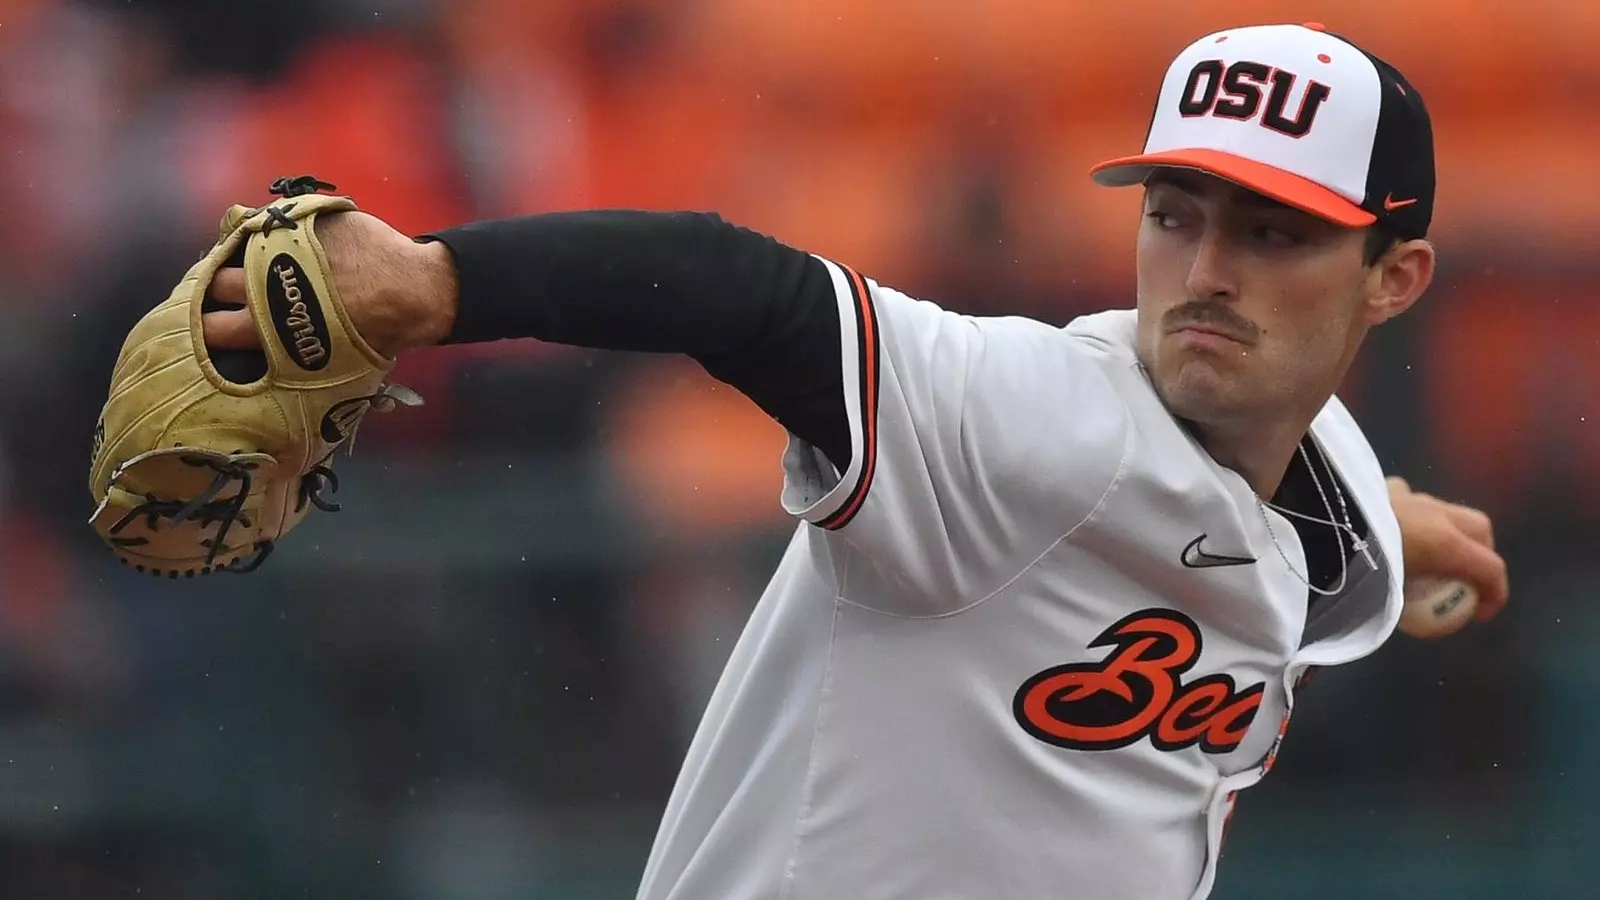 Cooper Hjerpe, wearing an Oregon State Beavers uniform, pitches the baseball during a game.